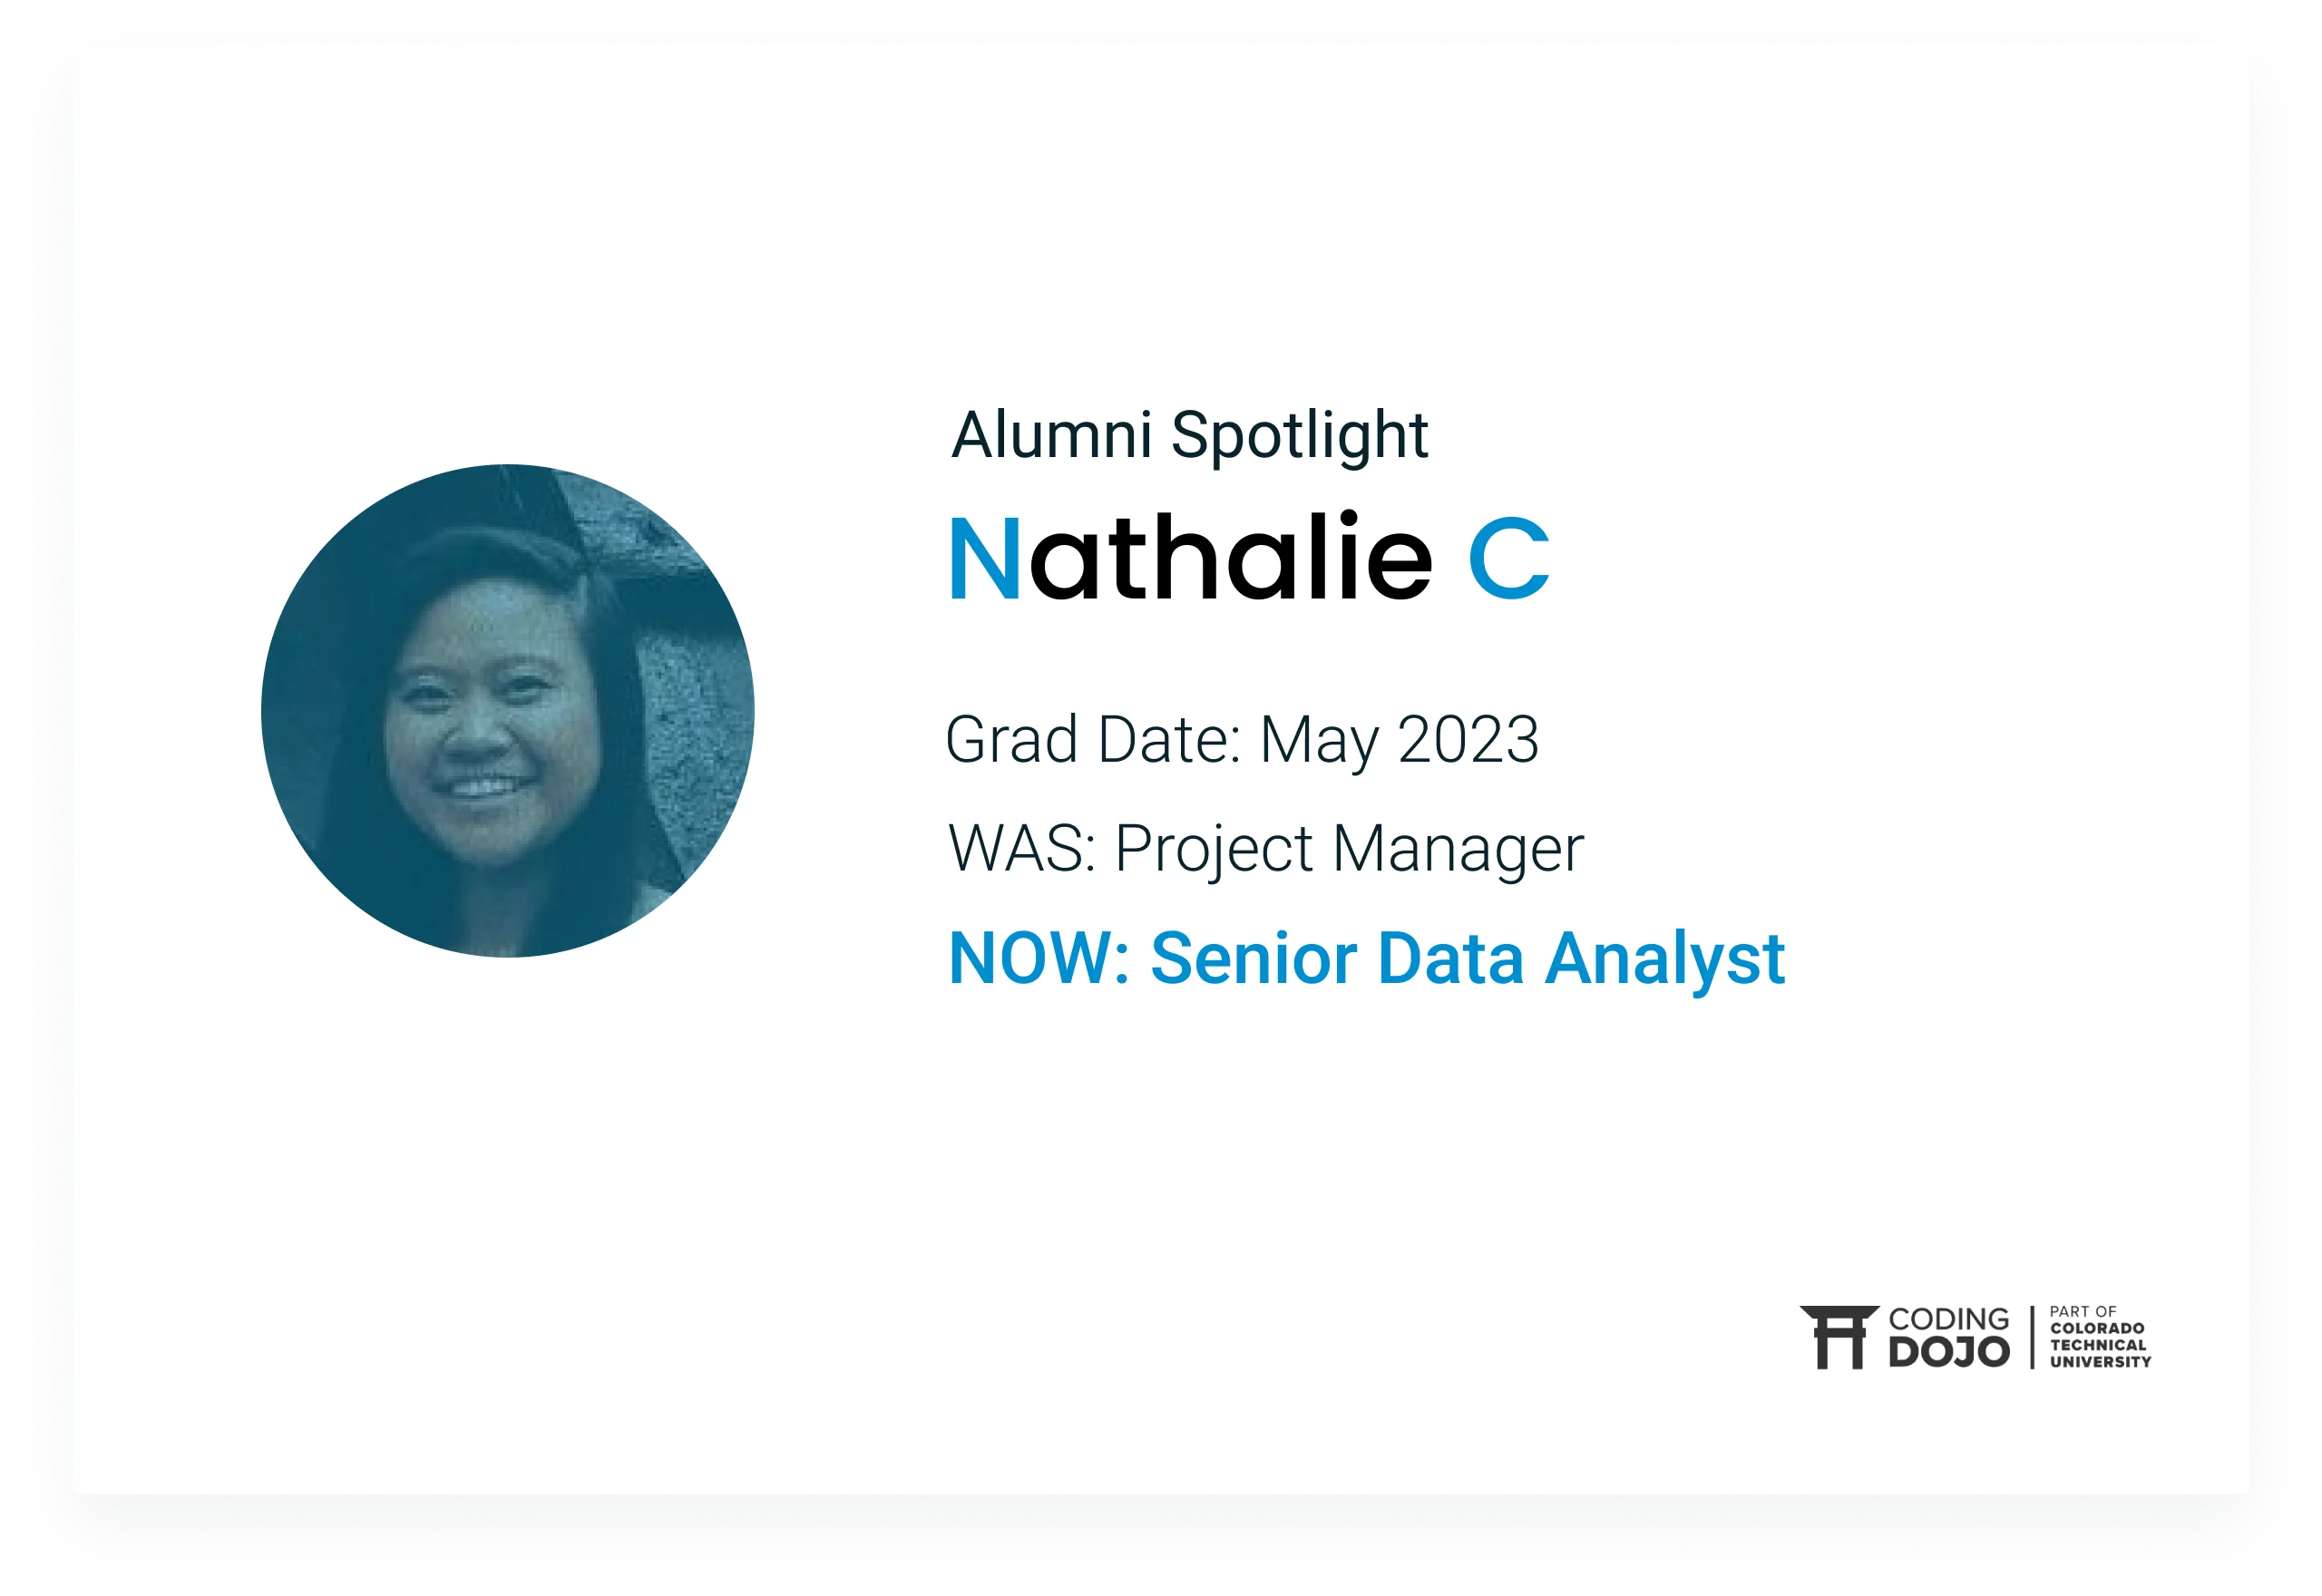 From Project Manager to Sr. Data Analyst | How Alumni Nathalie C Upskilled to Advance Her Career Path